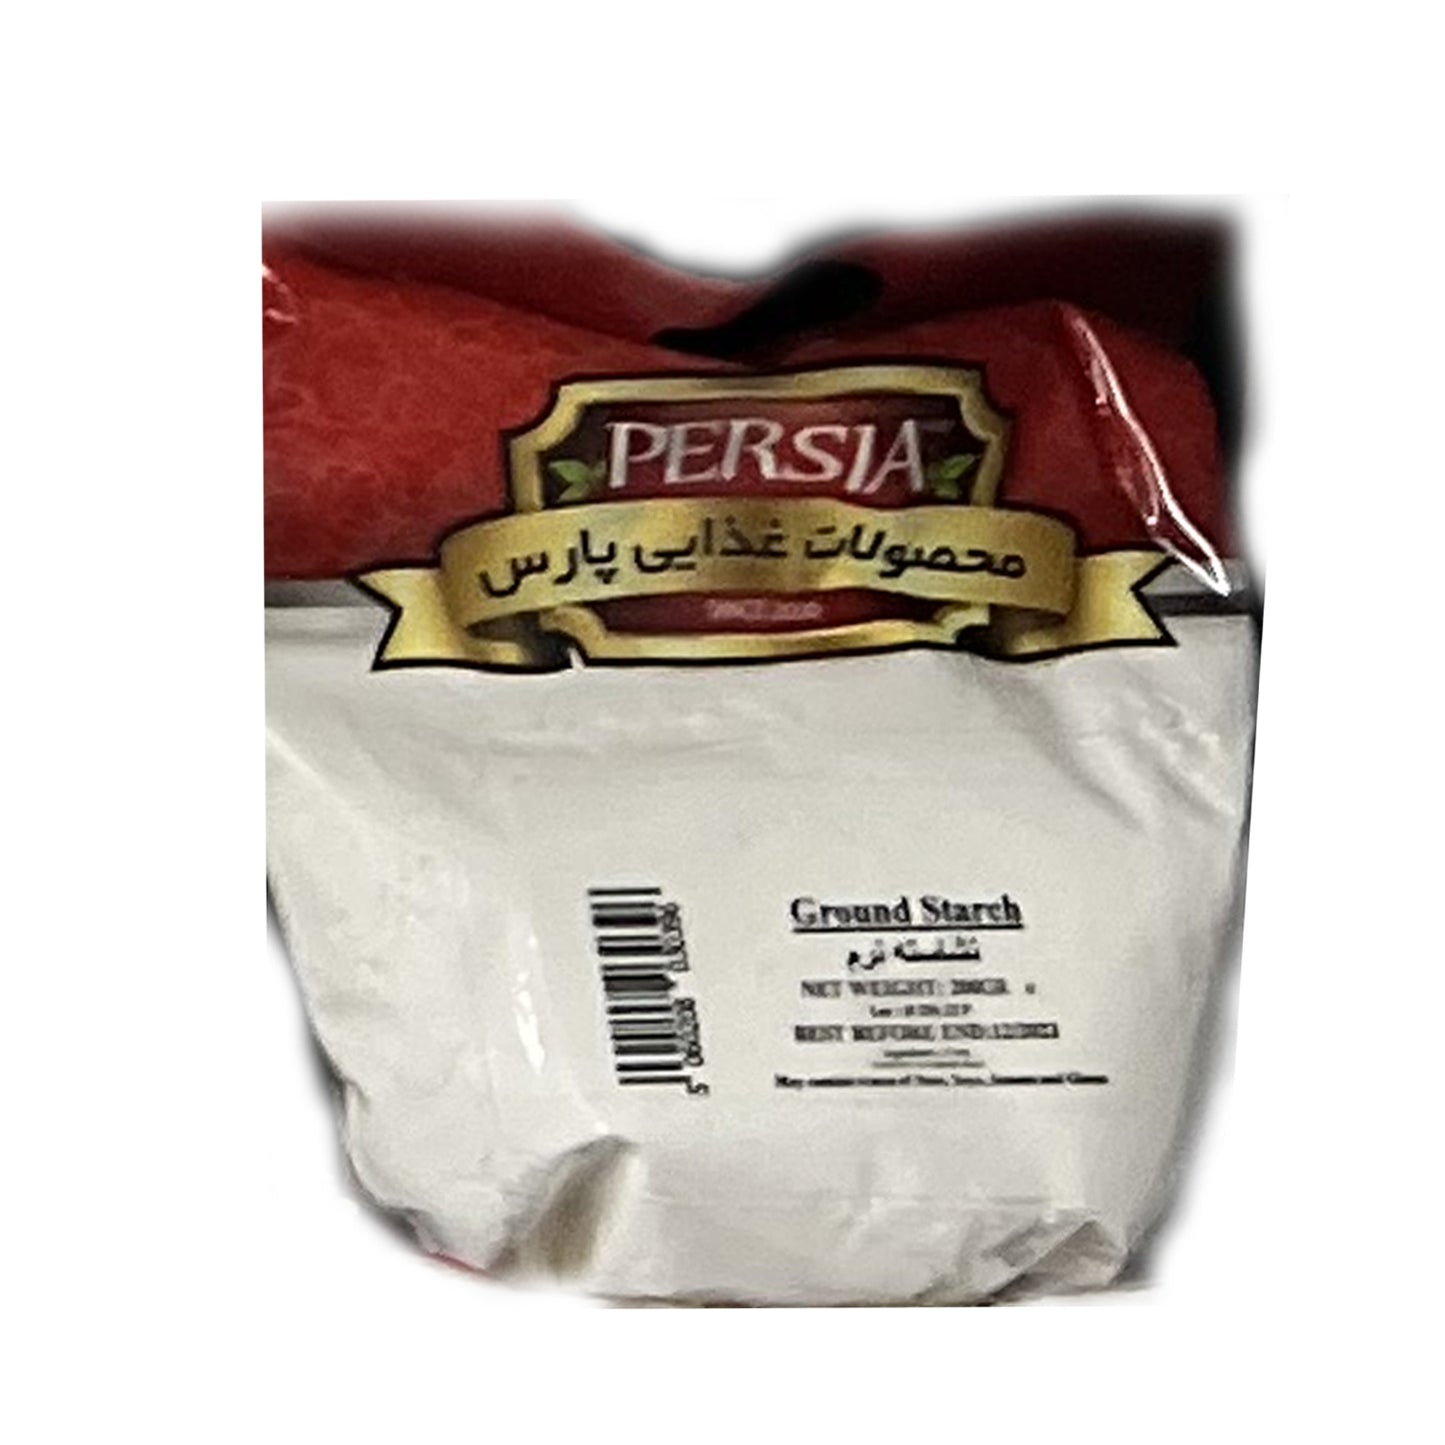 Persia Food Ground Starch